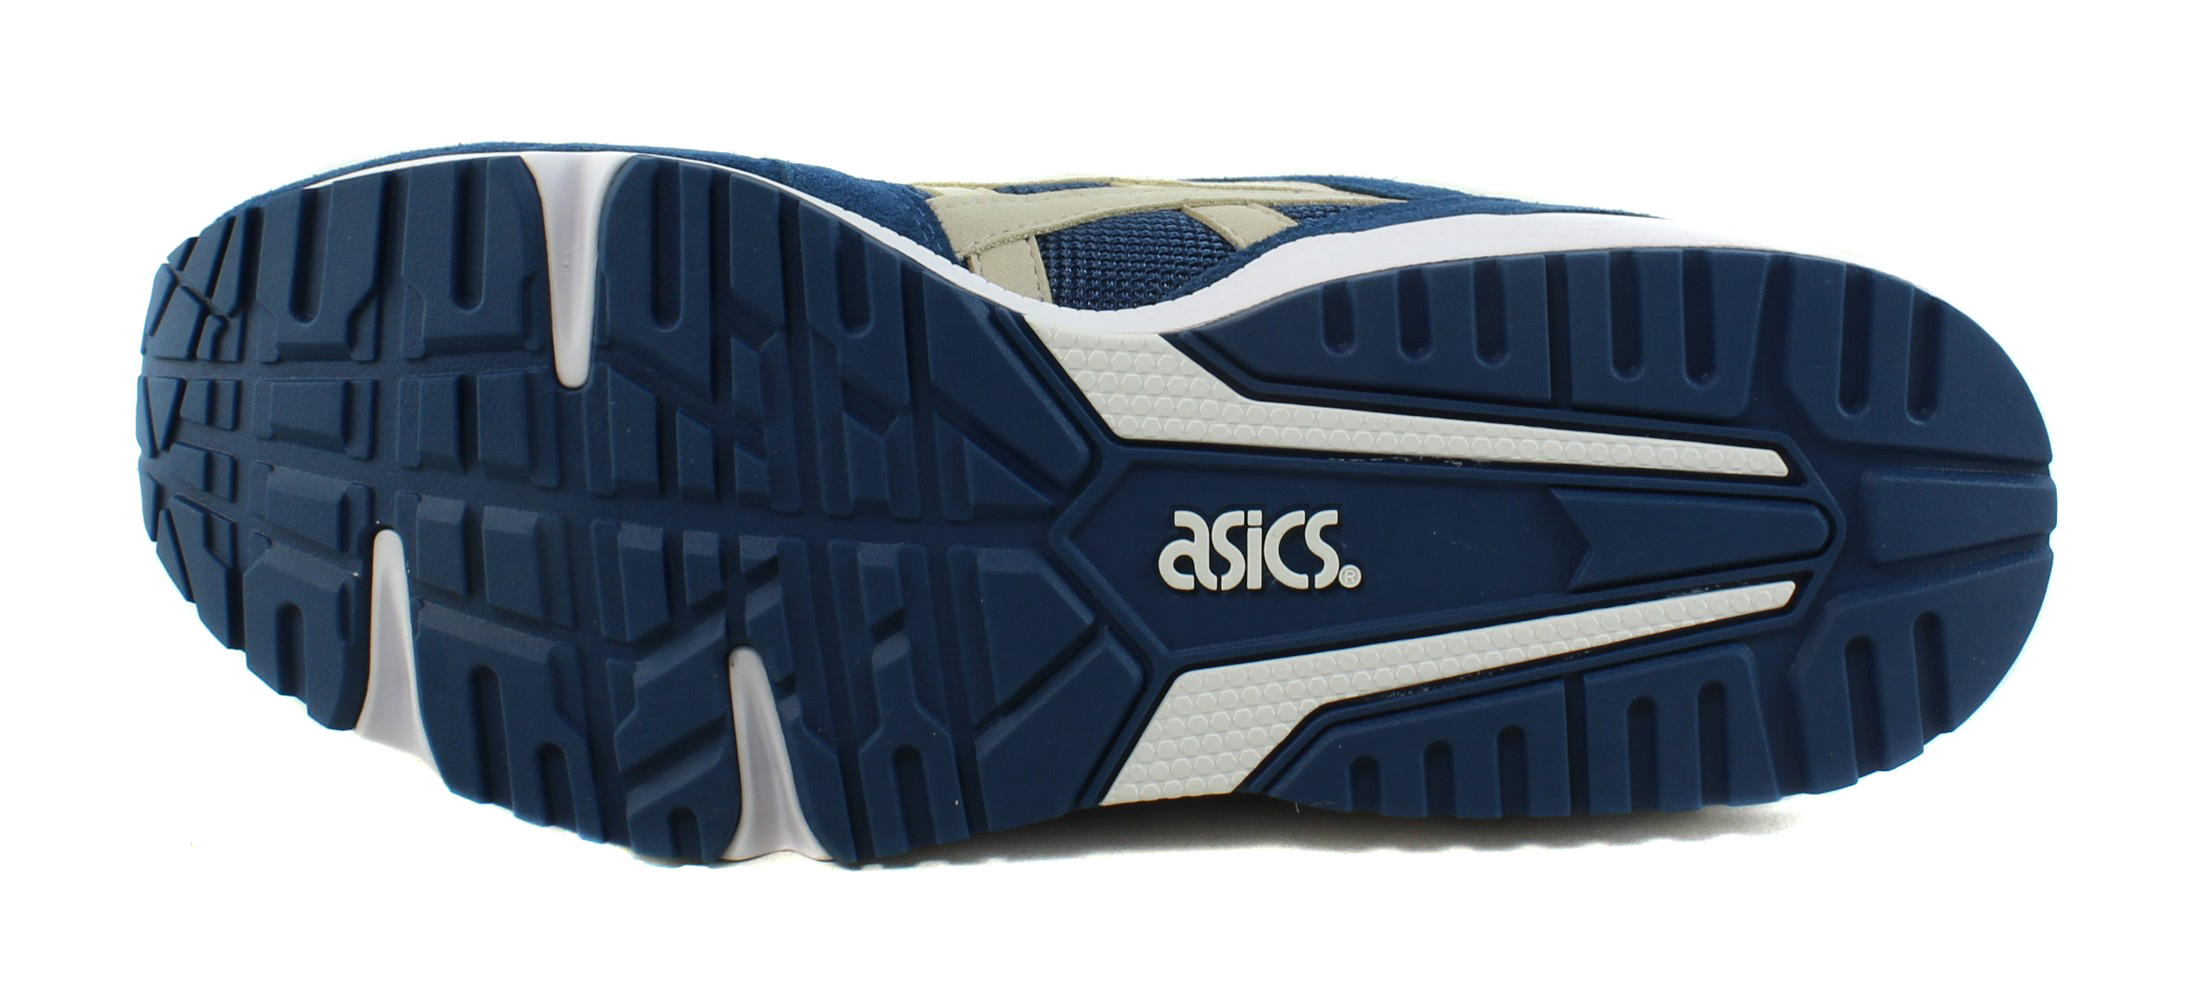 ASICS Mens Gel-Lique Suede Running Casual Sneaker Shoes - image 4 of 4